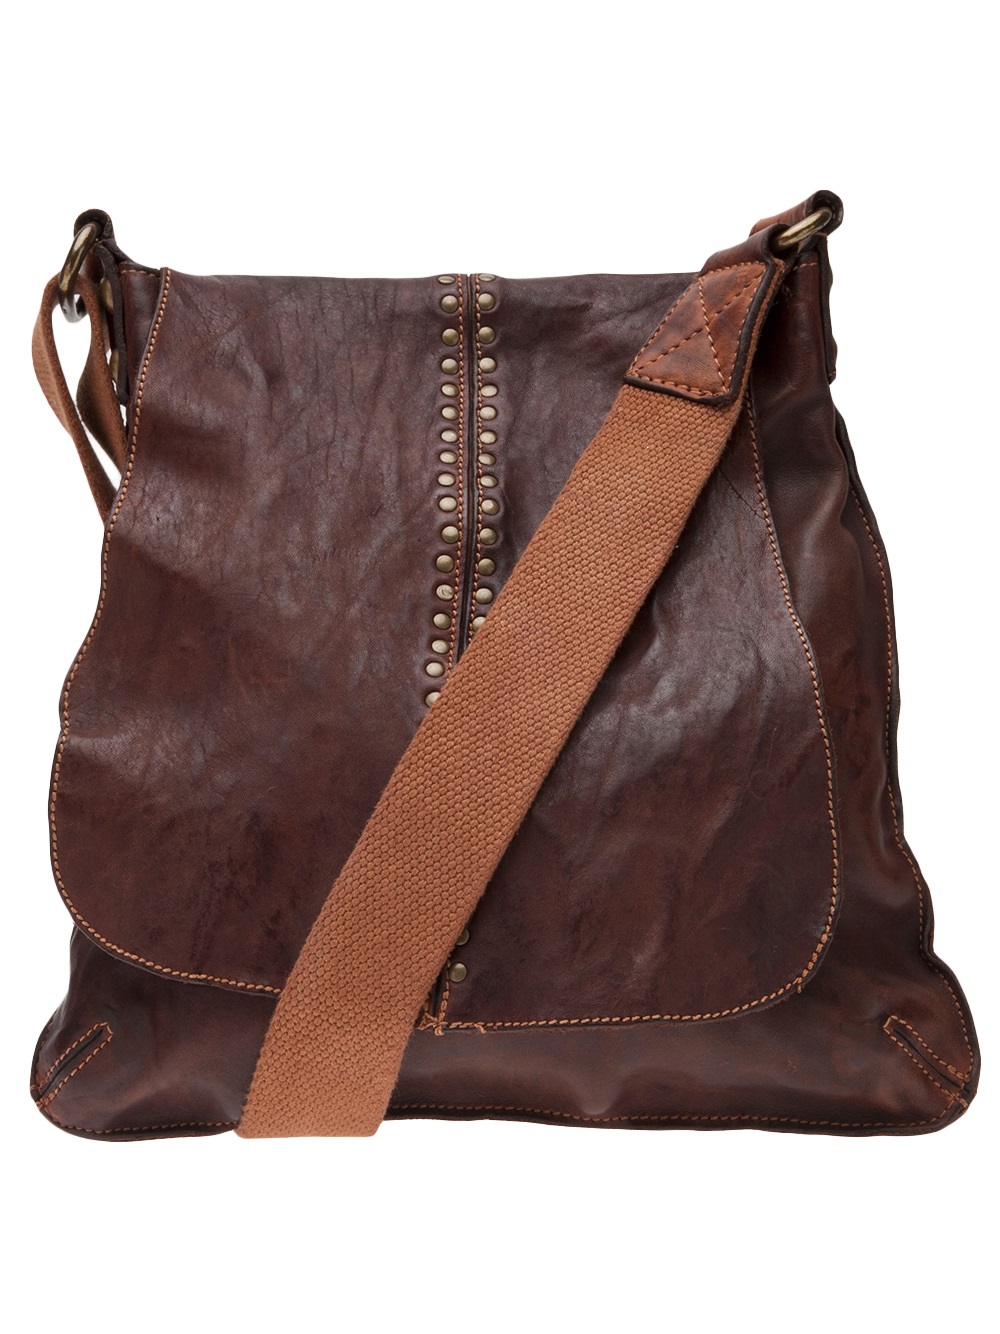 Lyst - Campomaggi Studded Square Bag in Brown